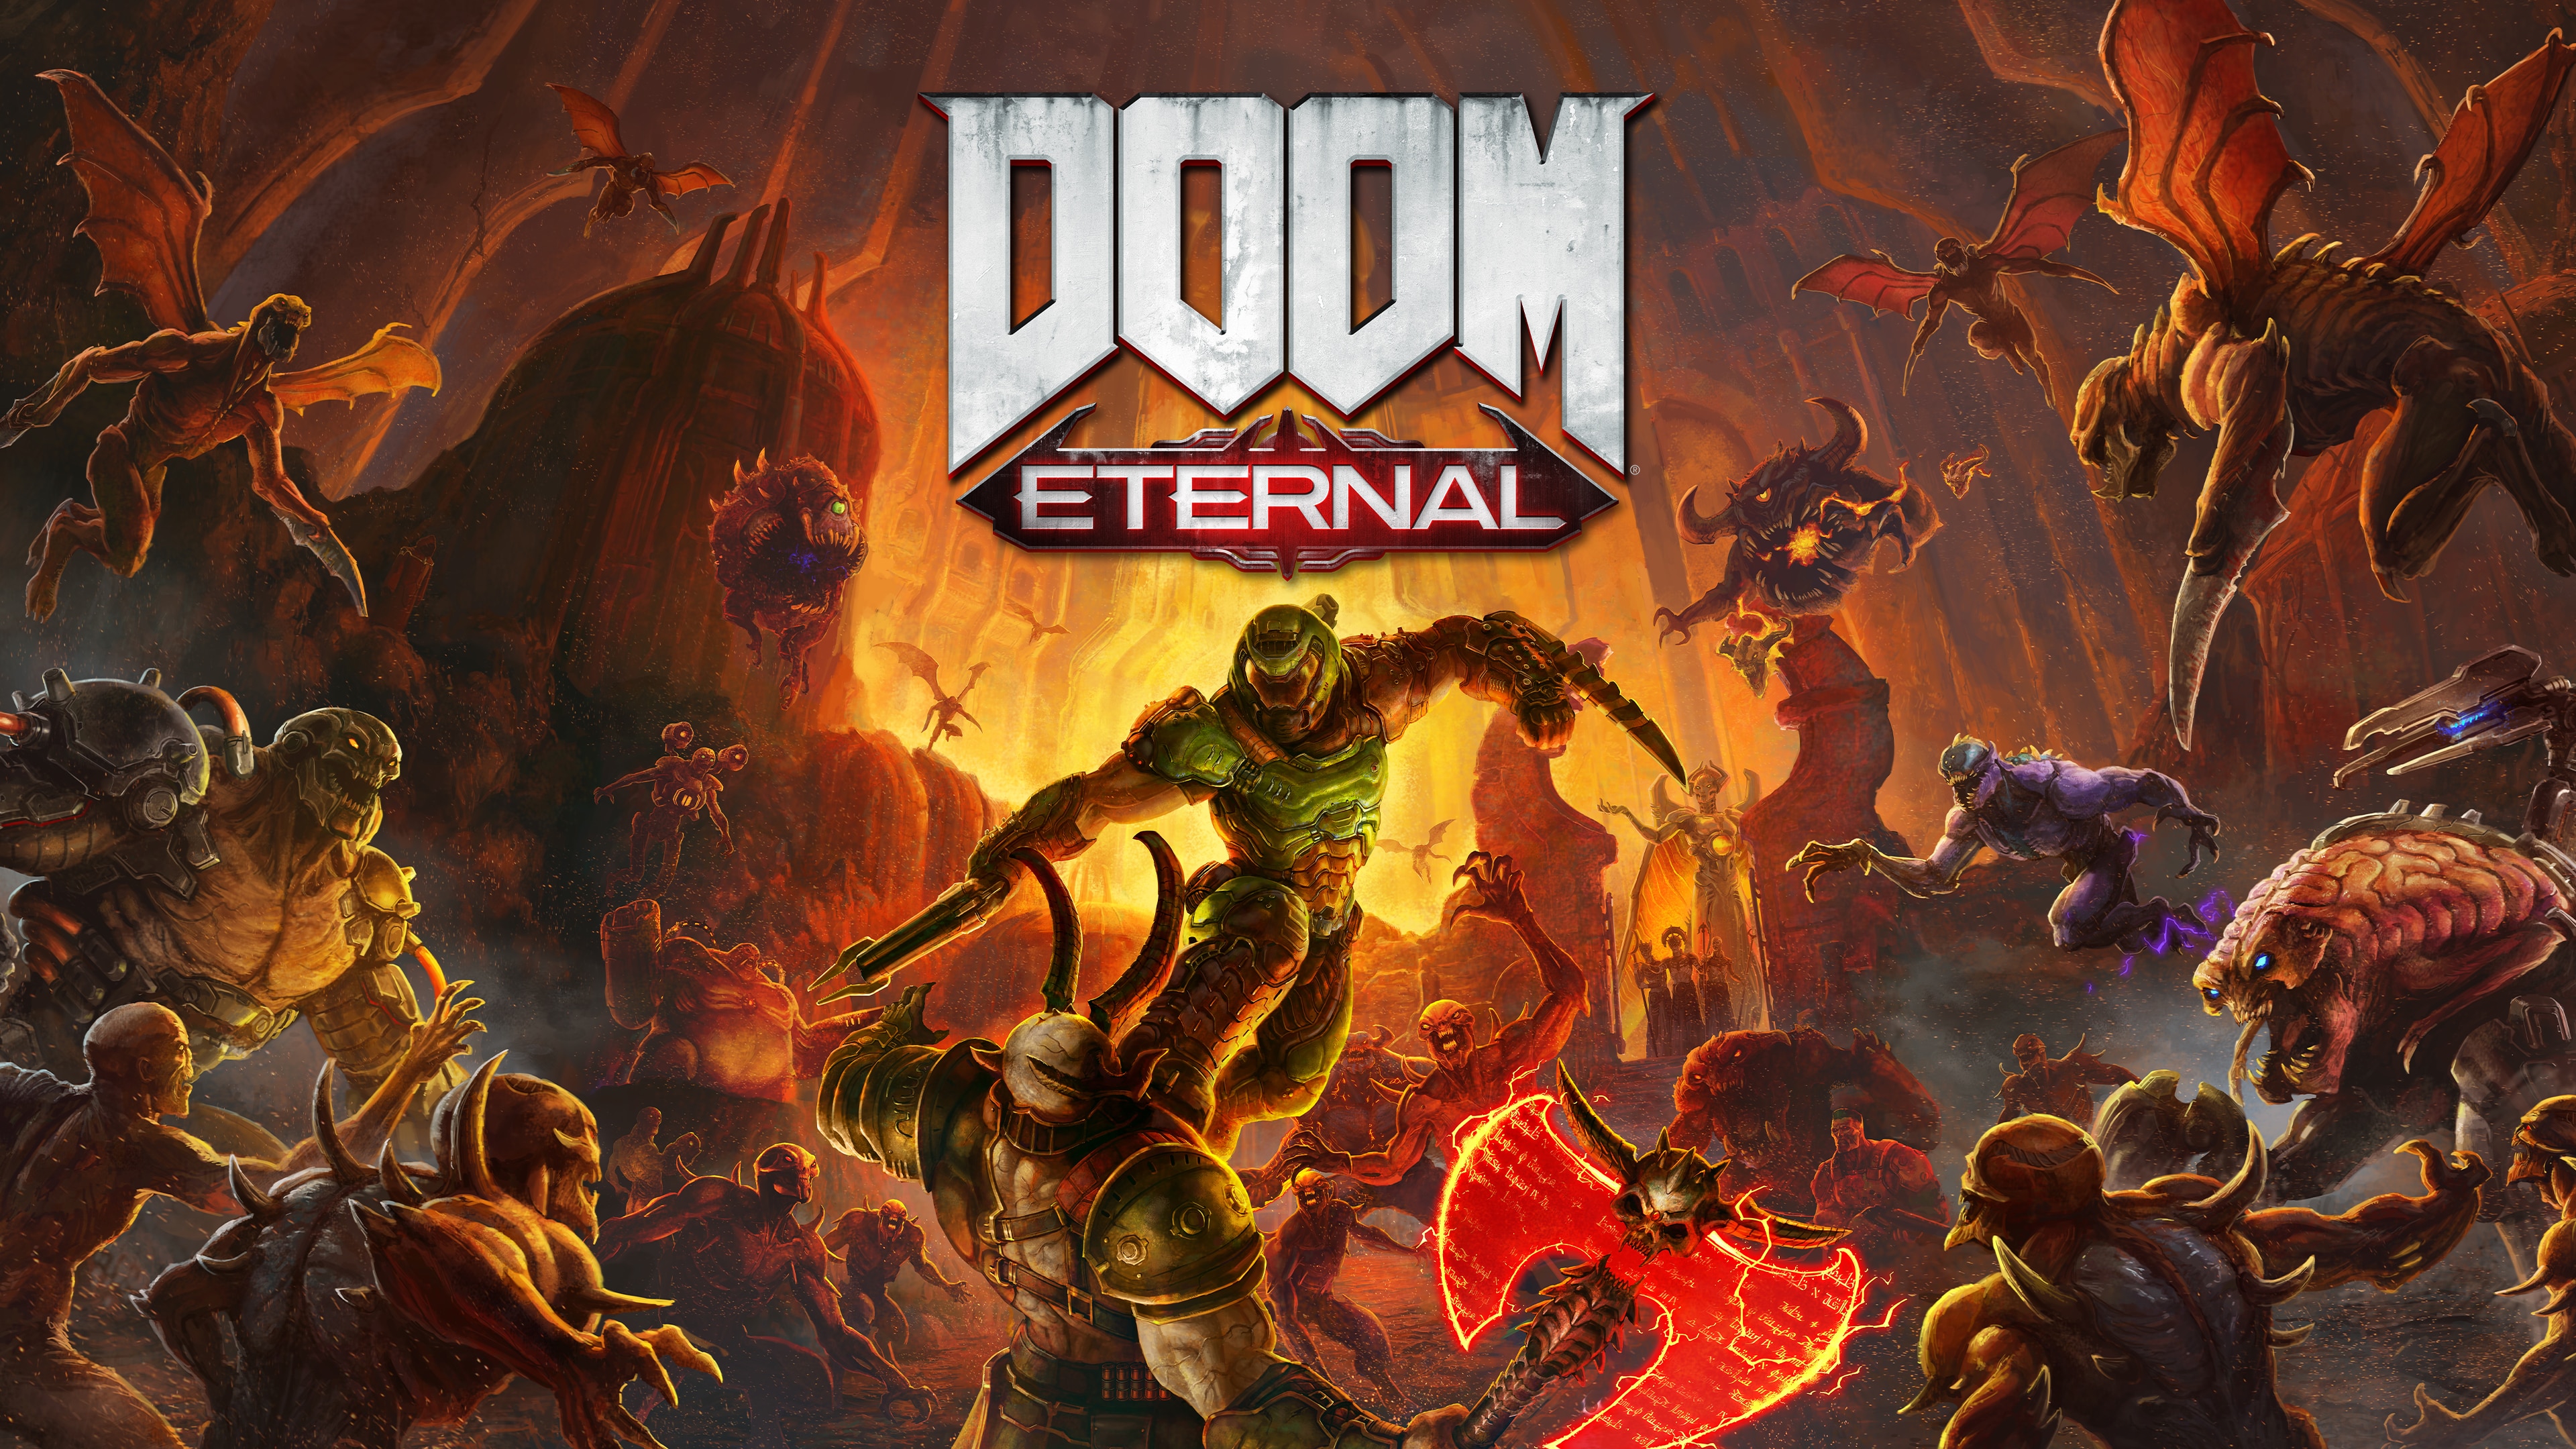 PlayStation Store (PSN) Digital Games: Doom Eternal Deluxe Ed (PS4/PS5) $22.49, Borderlands 3 Ultimate Edition (PS4/PS5) $39.99, Wasteland 3 $11.99 and more